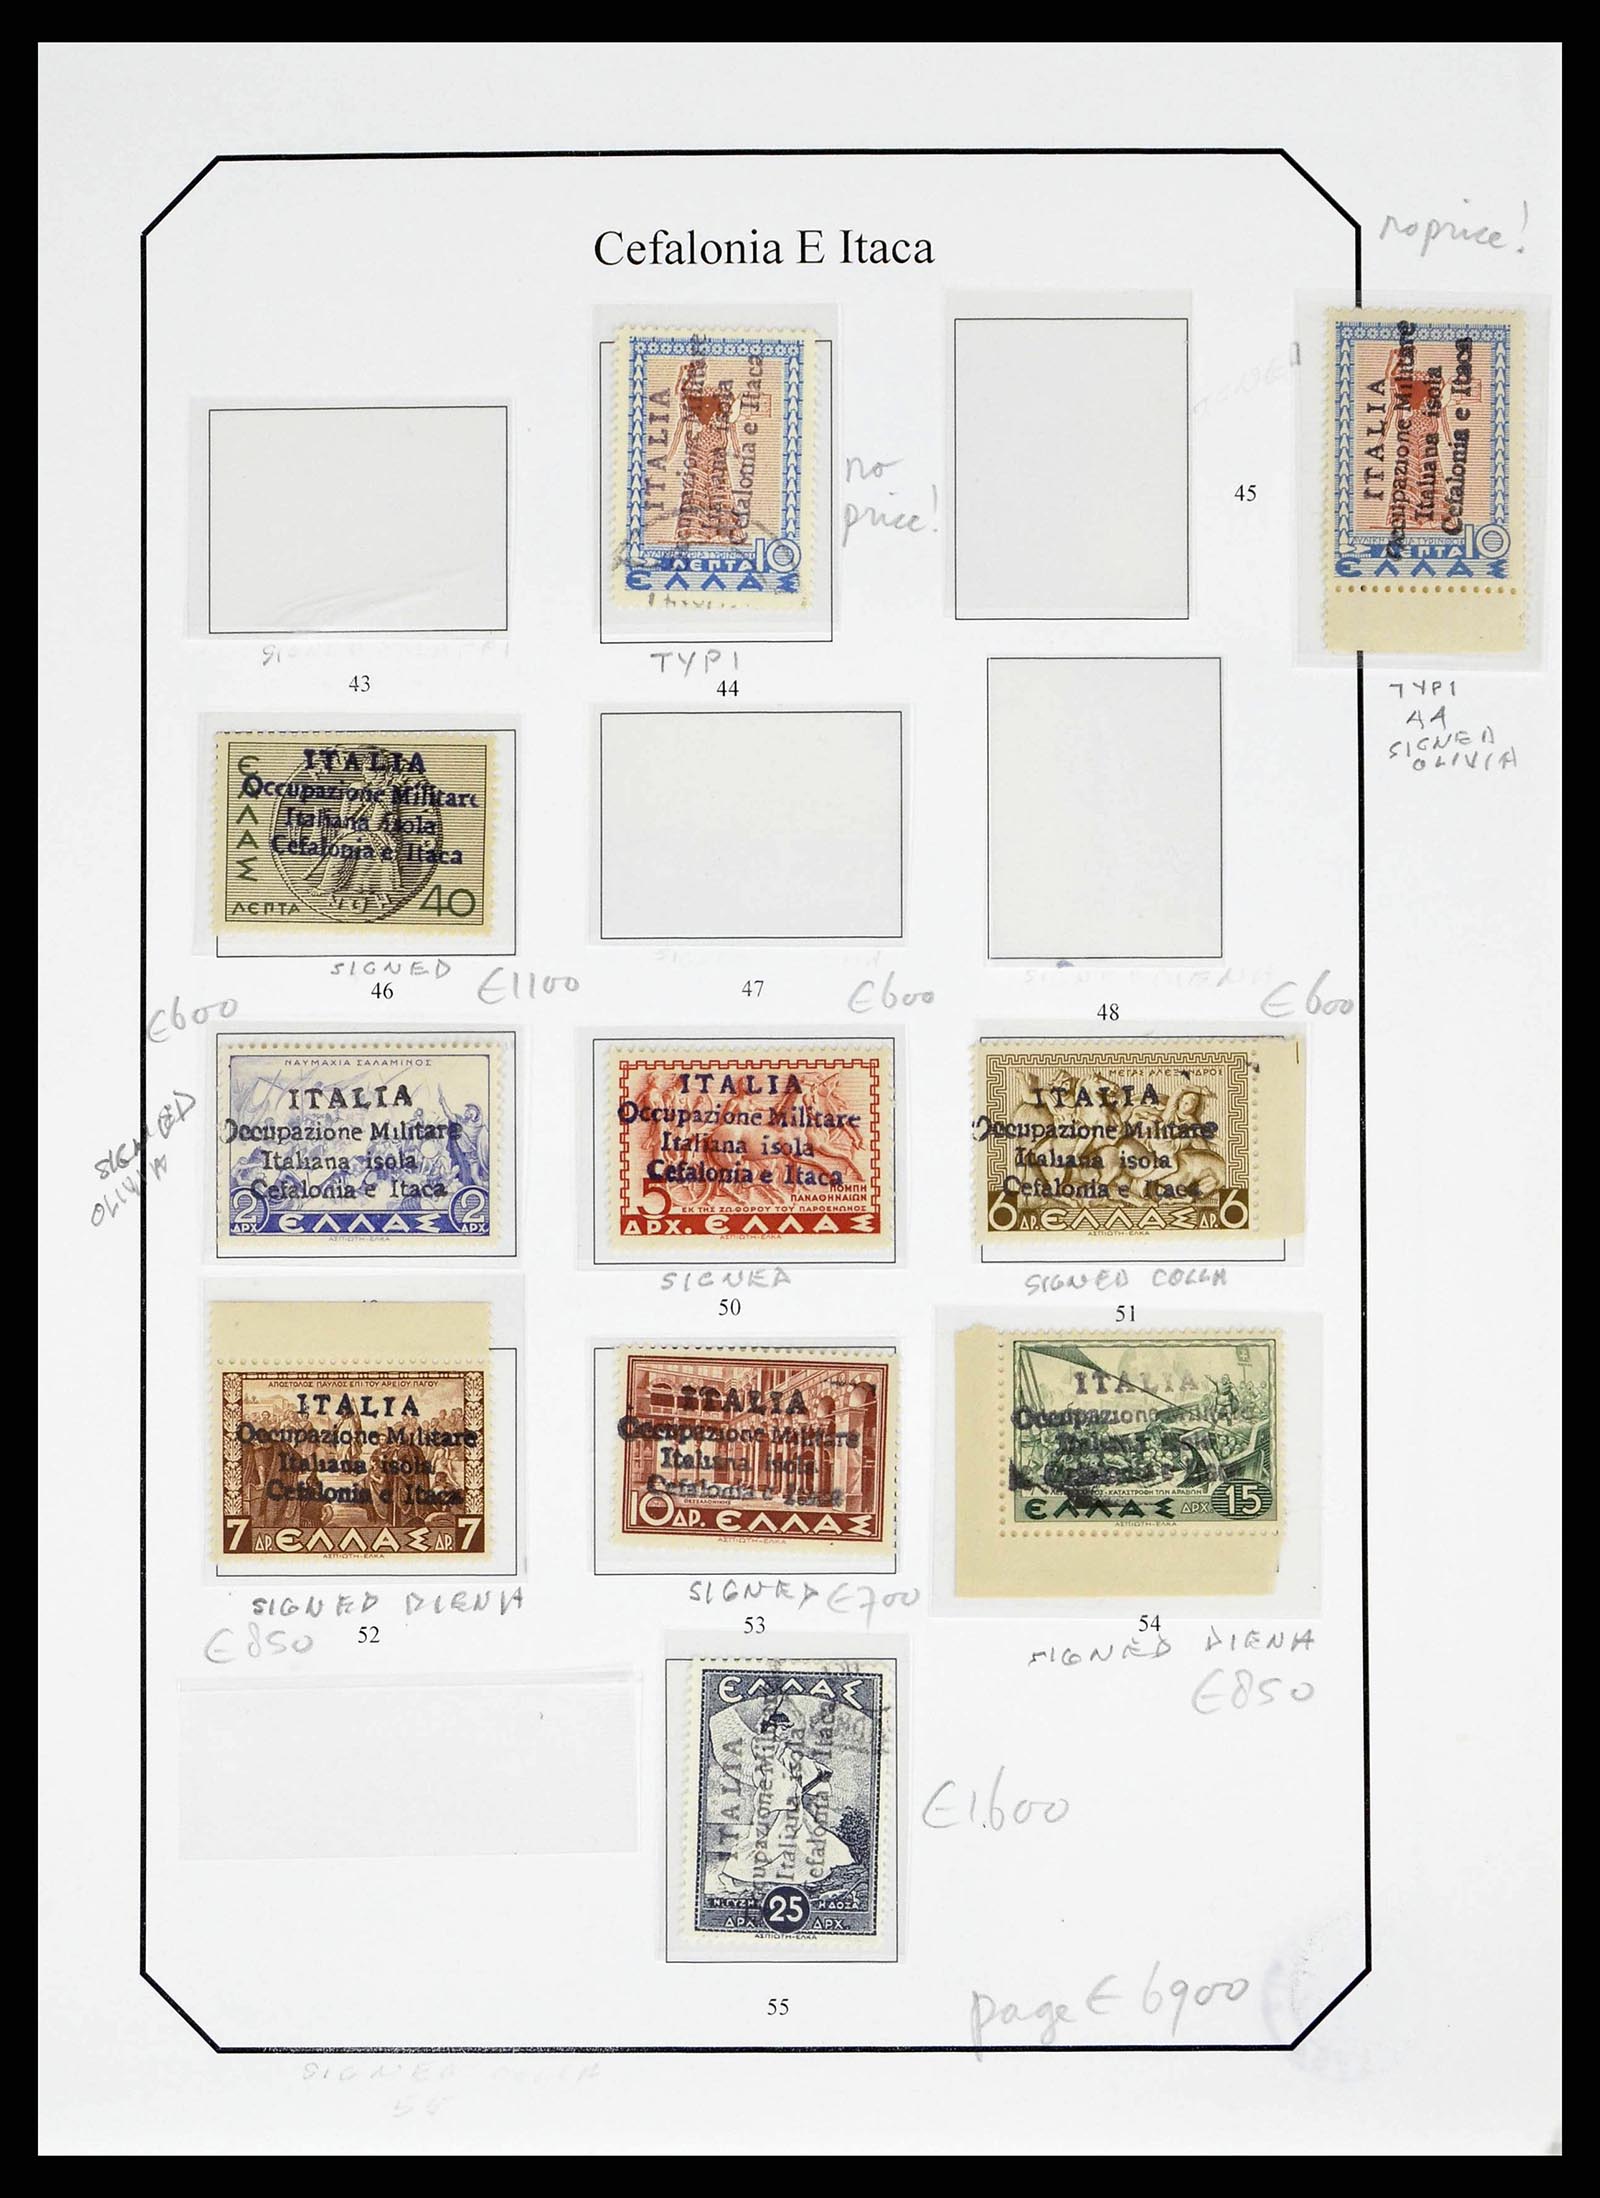 38989 0004 - Stamp collection 38989 Italian occupation Cefalonia and Itaca 1941.